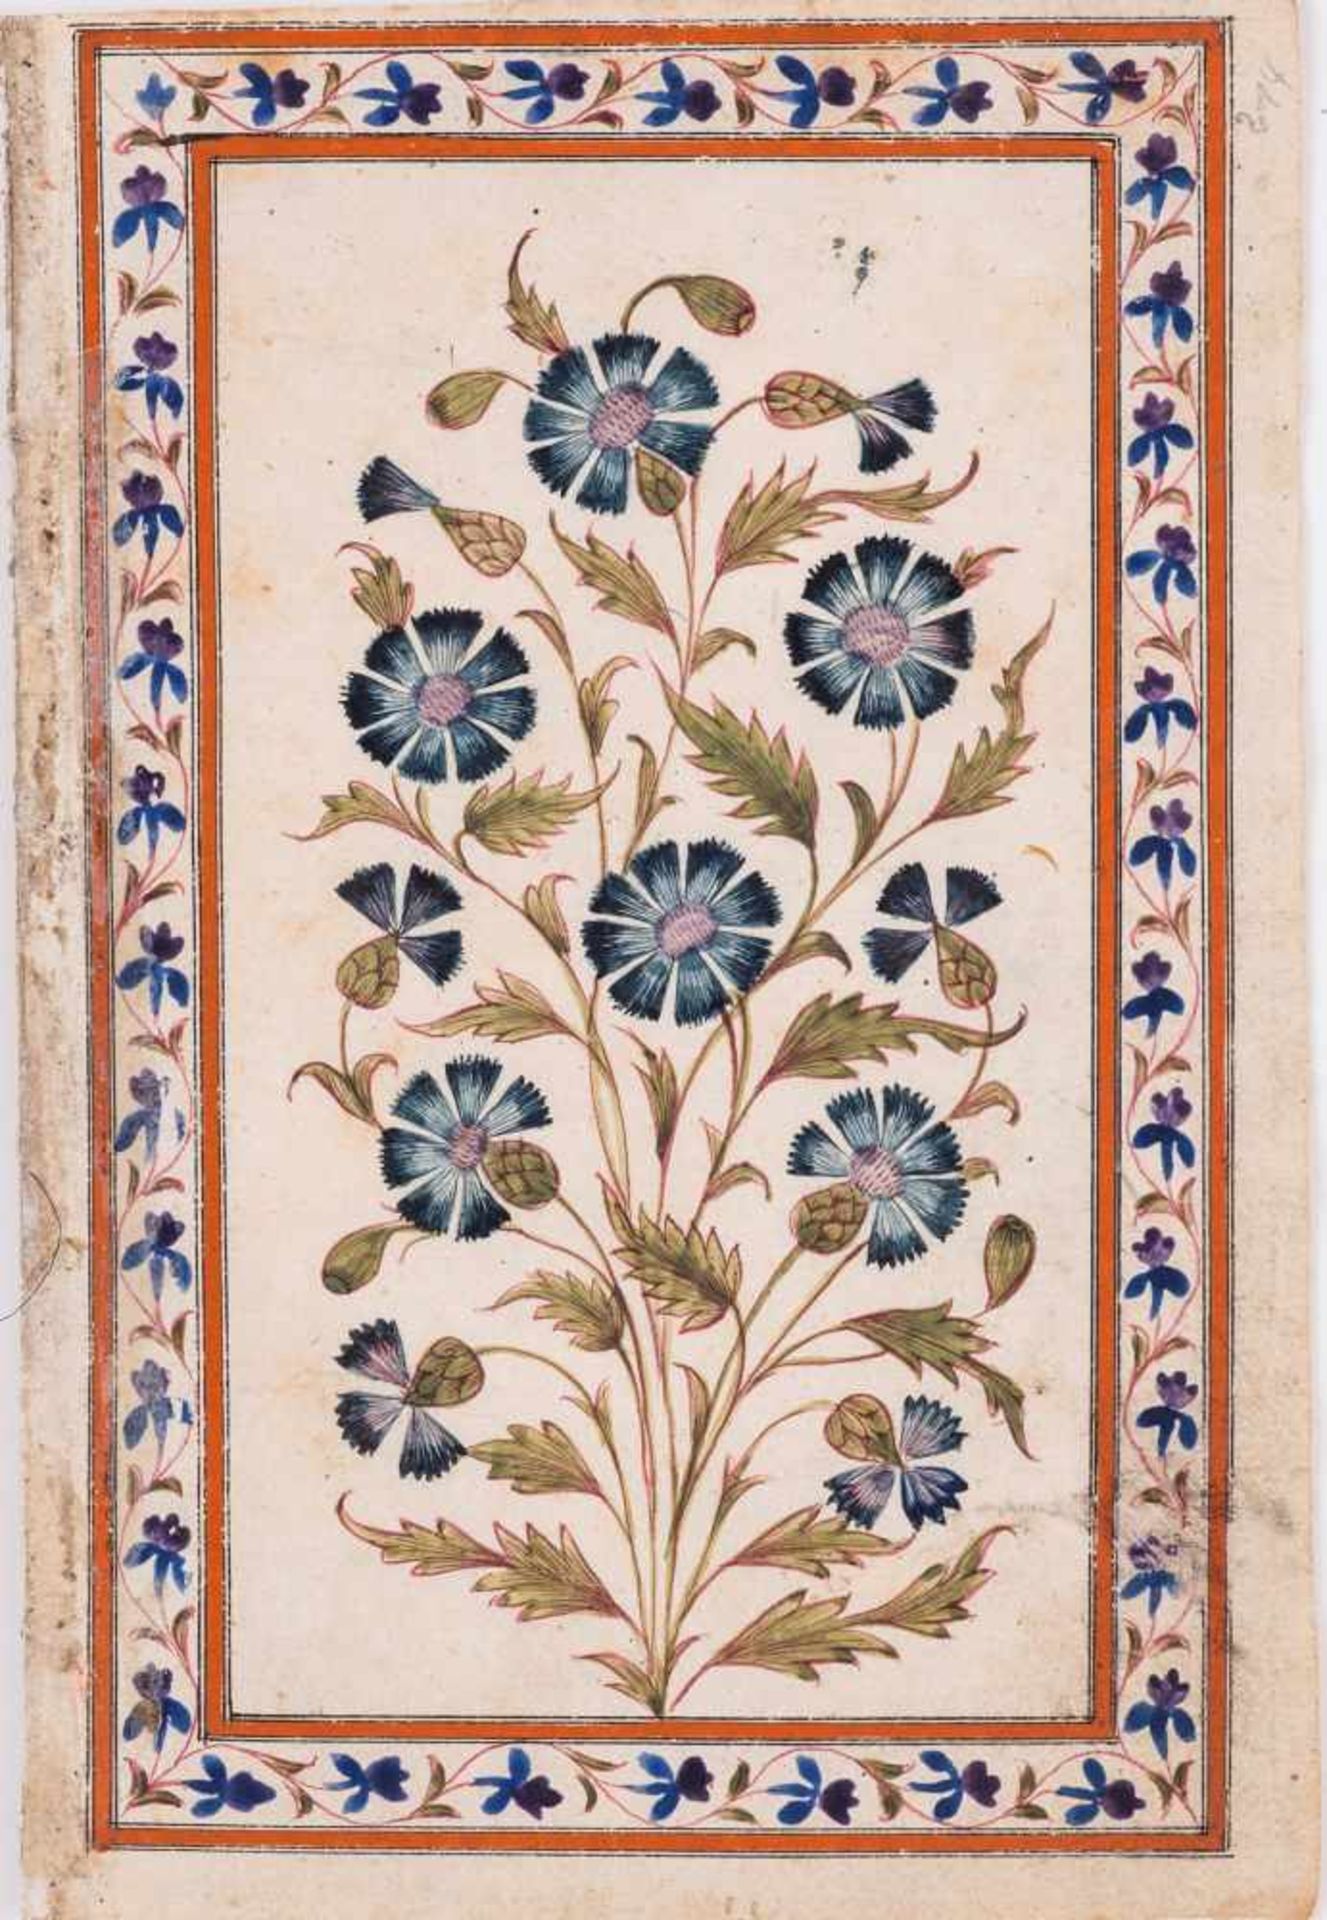 A GROUP OF ELEVEN FLOWER AND TREE MINIATURE PAINTINGS – INDIA 19th CENTURYWatercolors and gold paint - Image 11 of 12